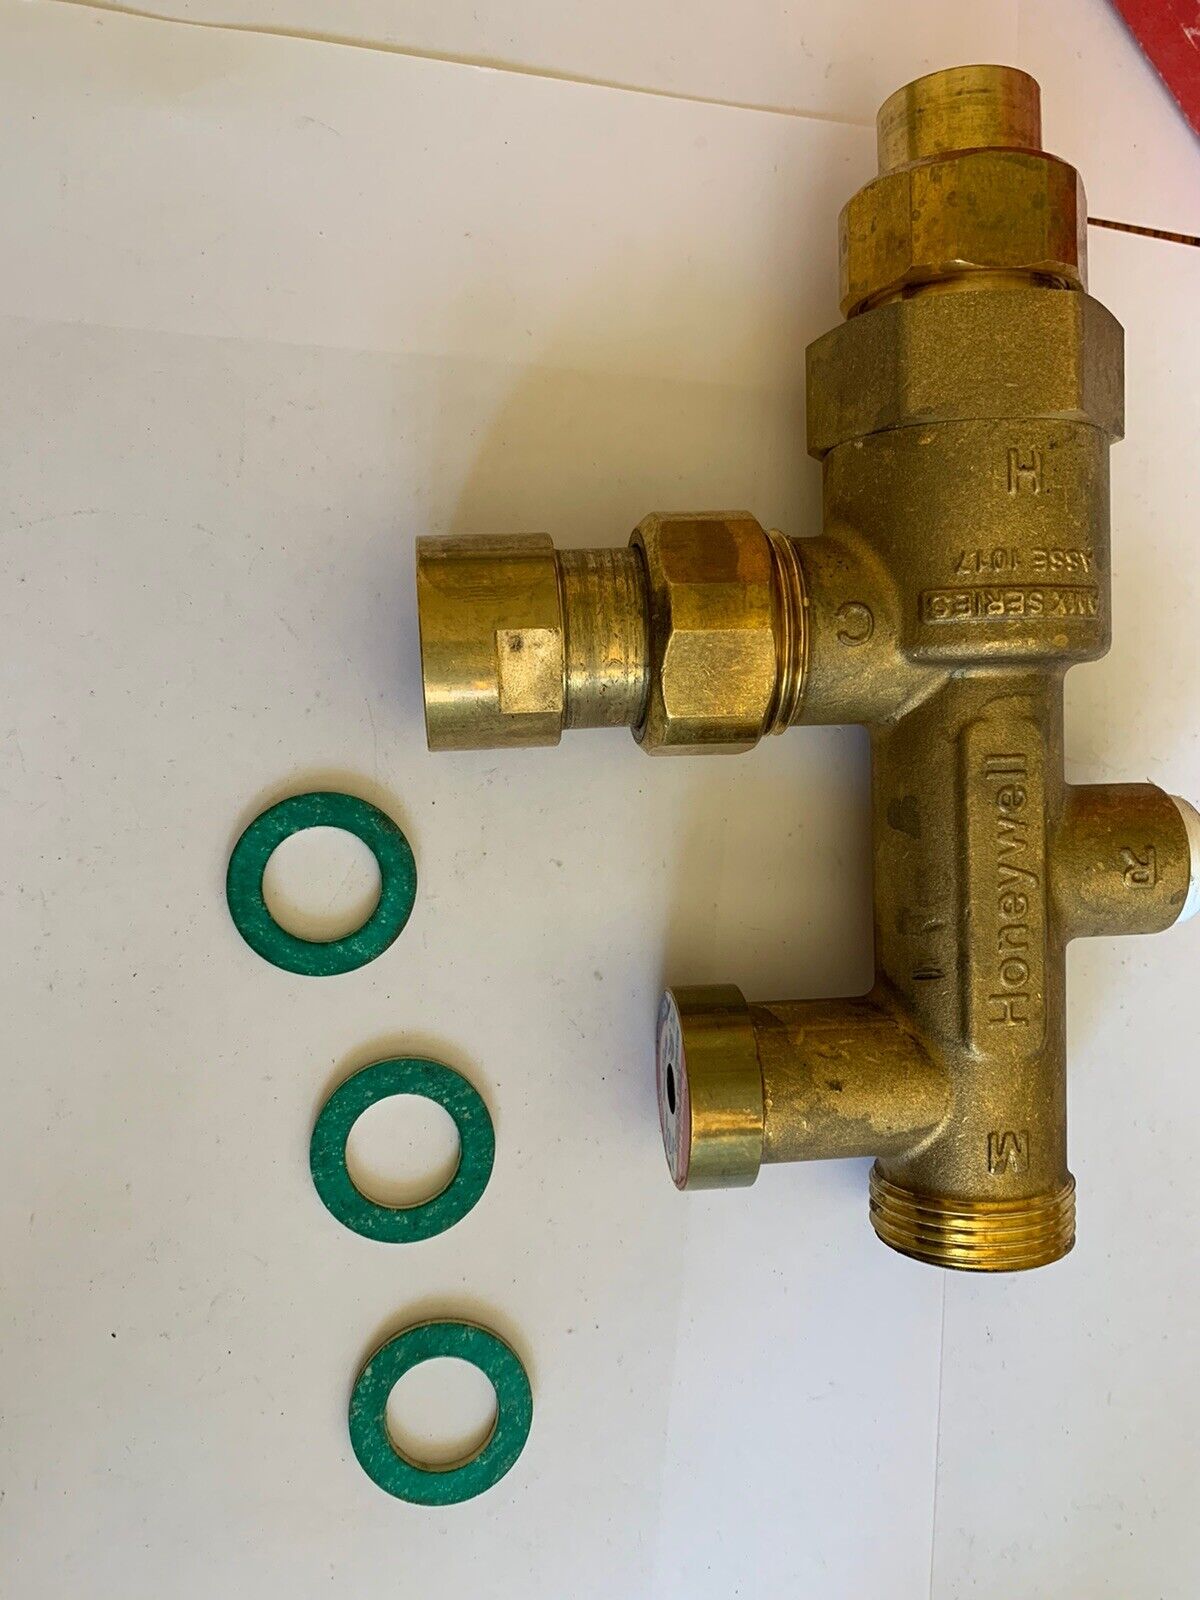 Honeywell Amx3 3 4 Direct Connect Water Heater Mixing Valve For